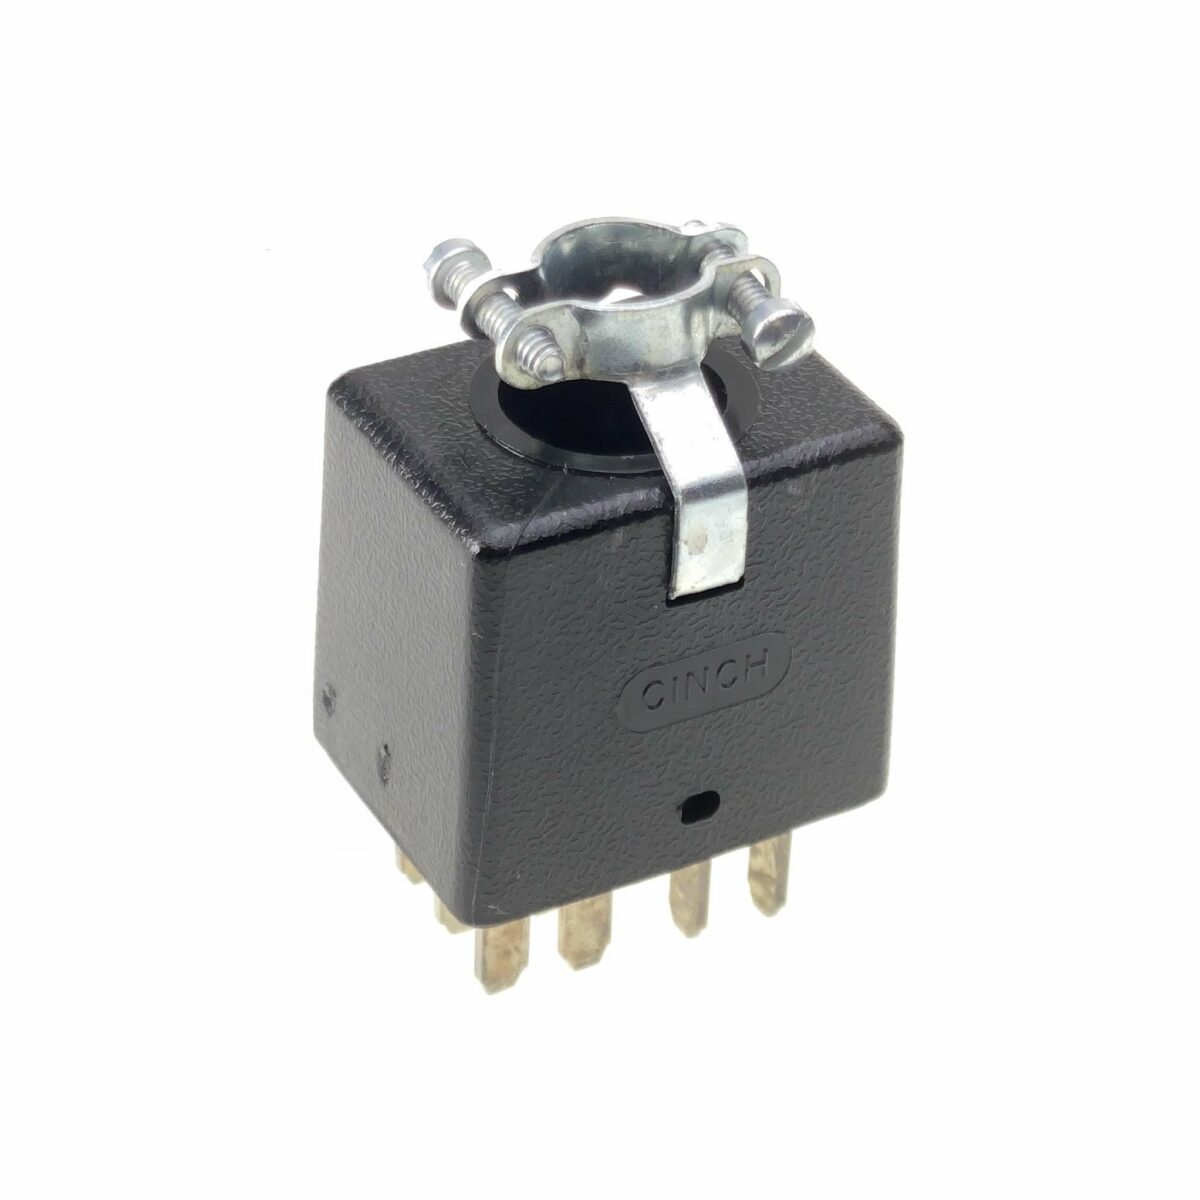 DBX 165, 165A Stereo Link Connector